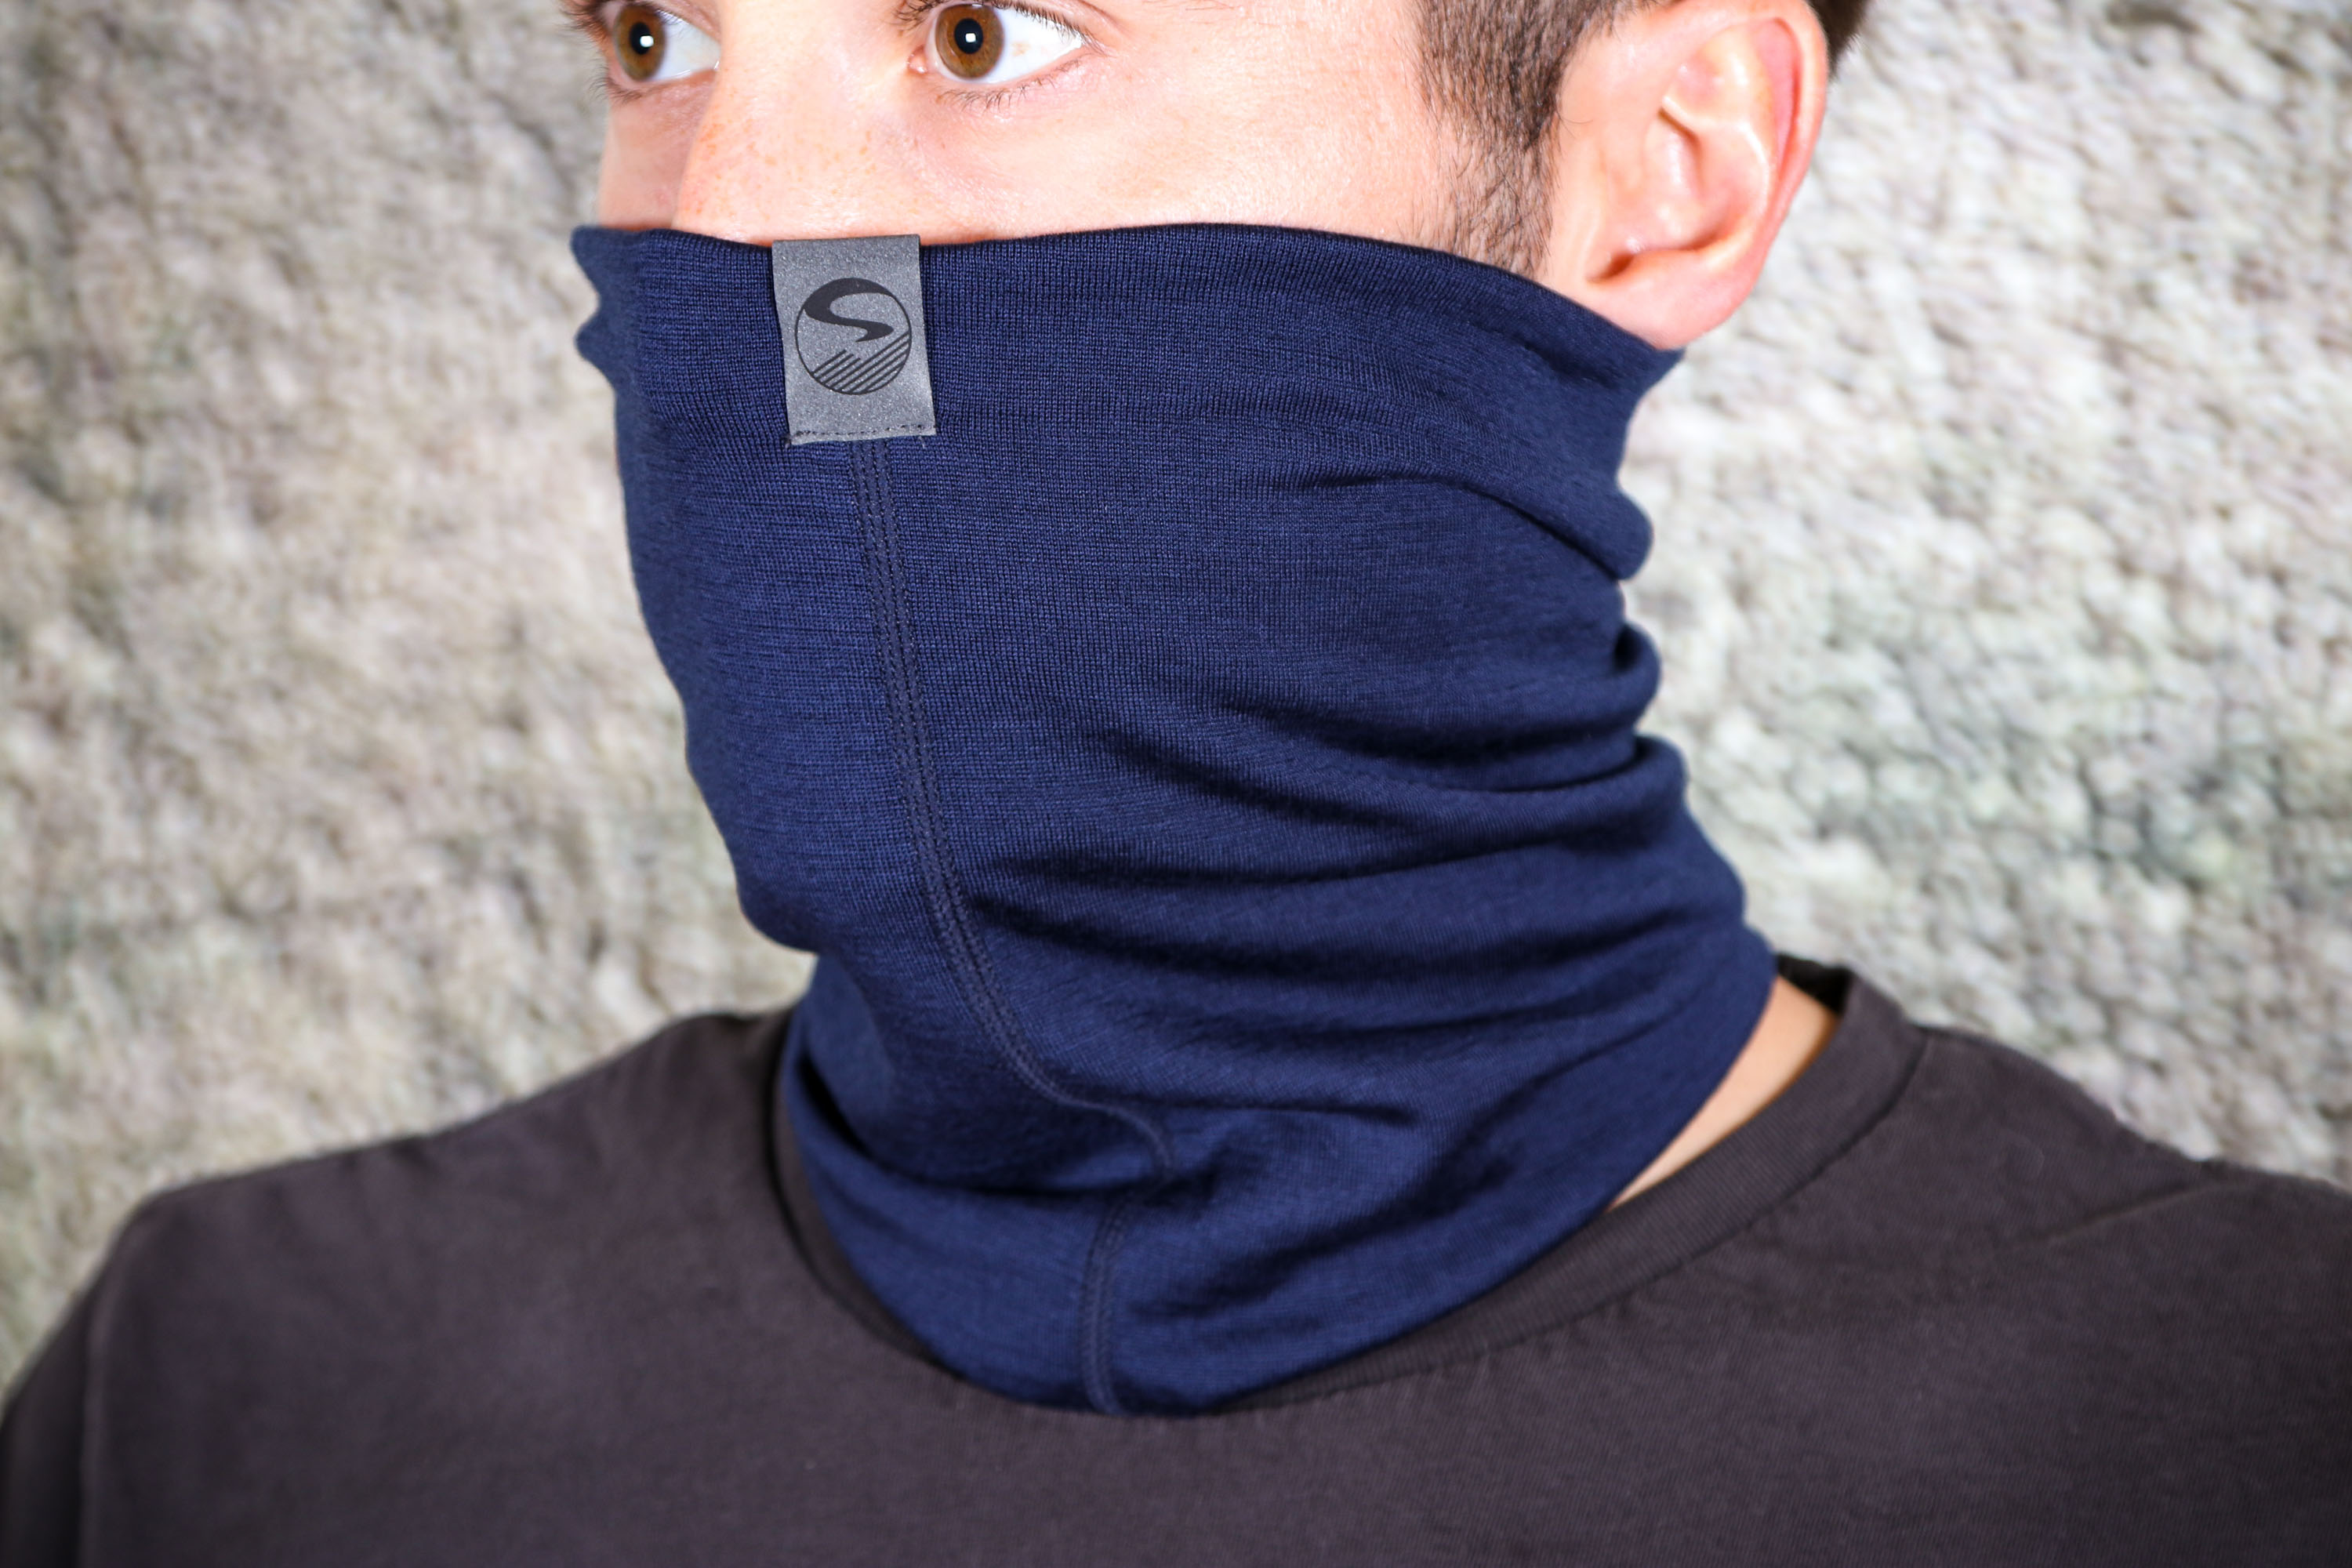 THERMAL SOCKS & NECK GAITER Lambretta Concessionaires Story WINTER DEAL! 